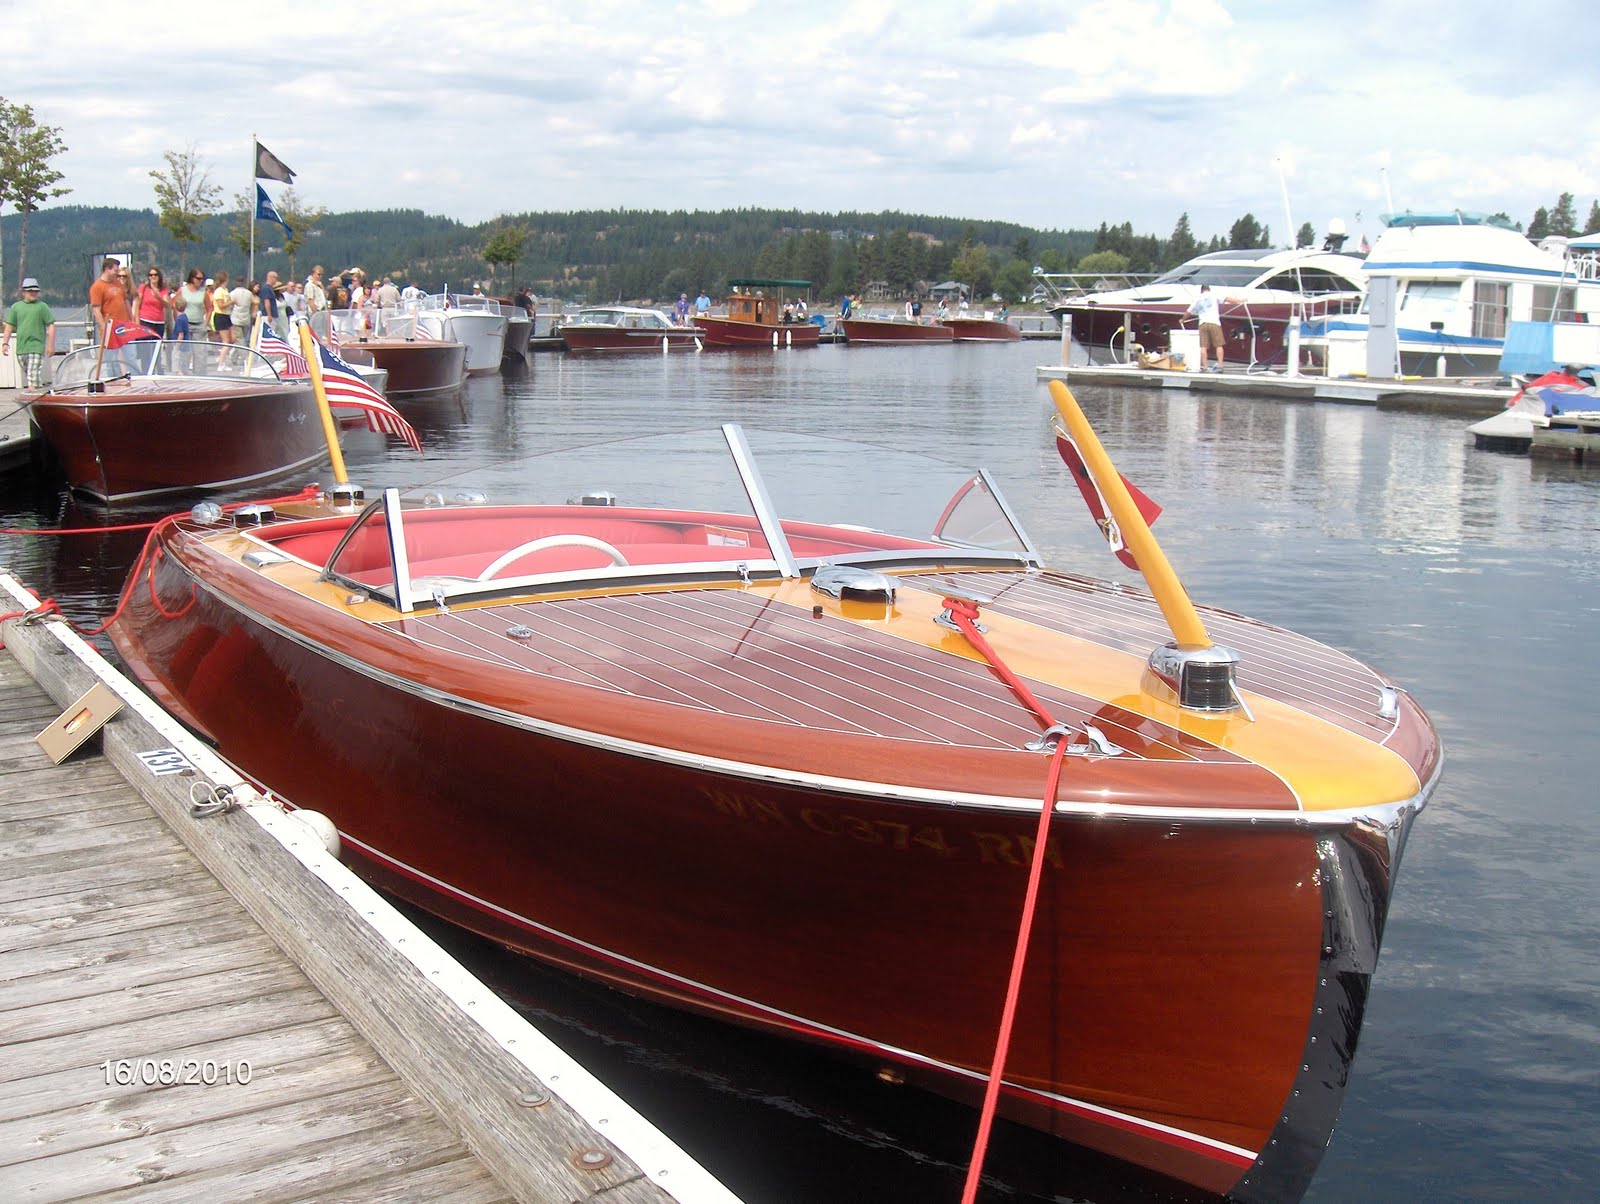 mccall boat works: 25th annual coeur d'alene wooden boat